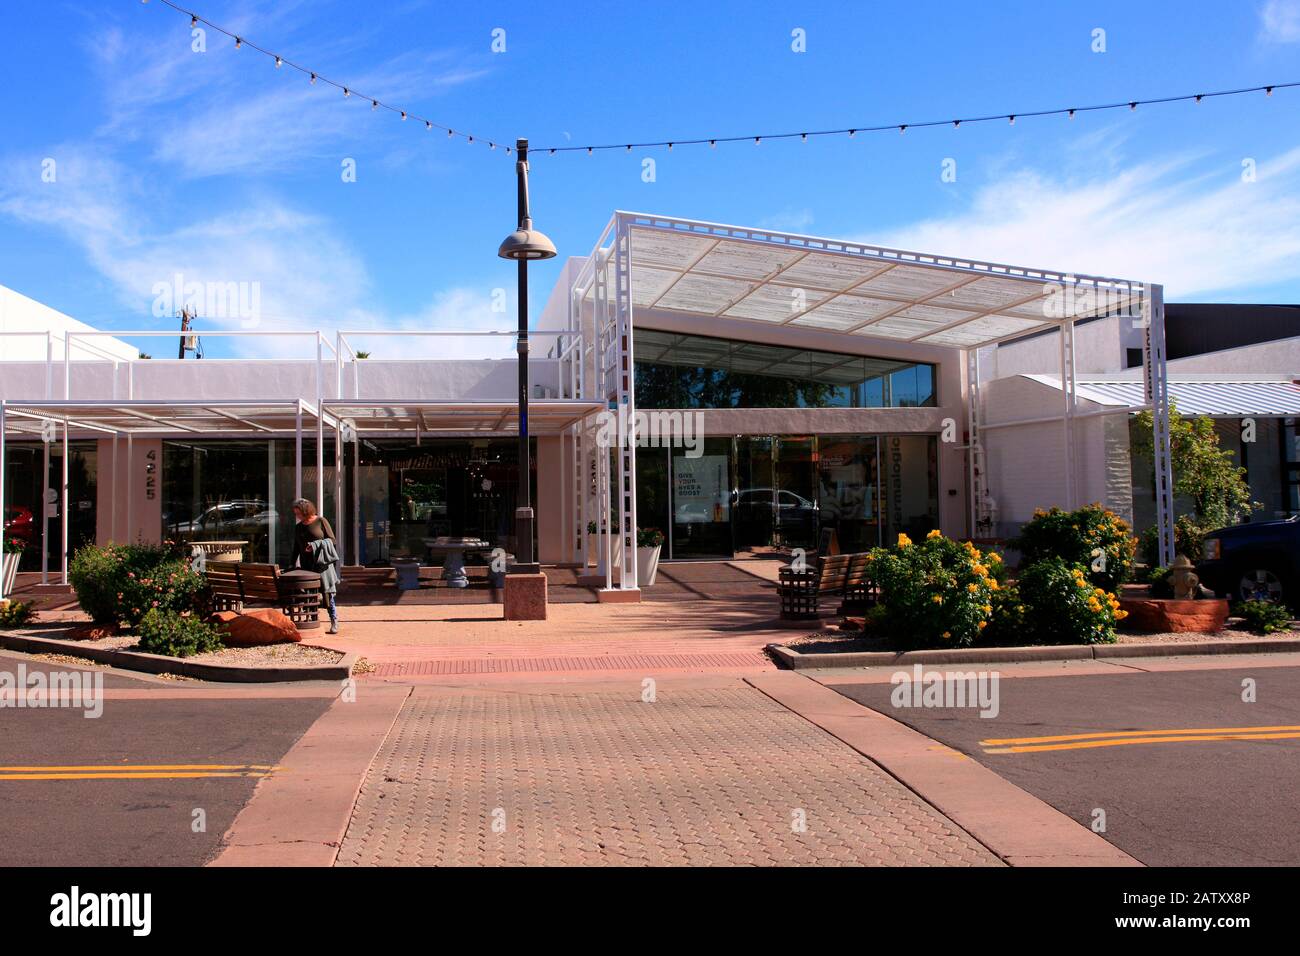 Marwshall Way Pavillion of stores in the Arts District of Old Town Scottsdale AZ Stock Photo